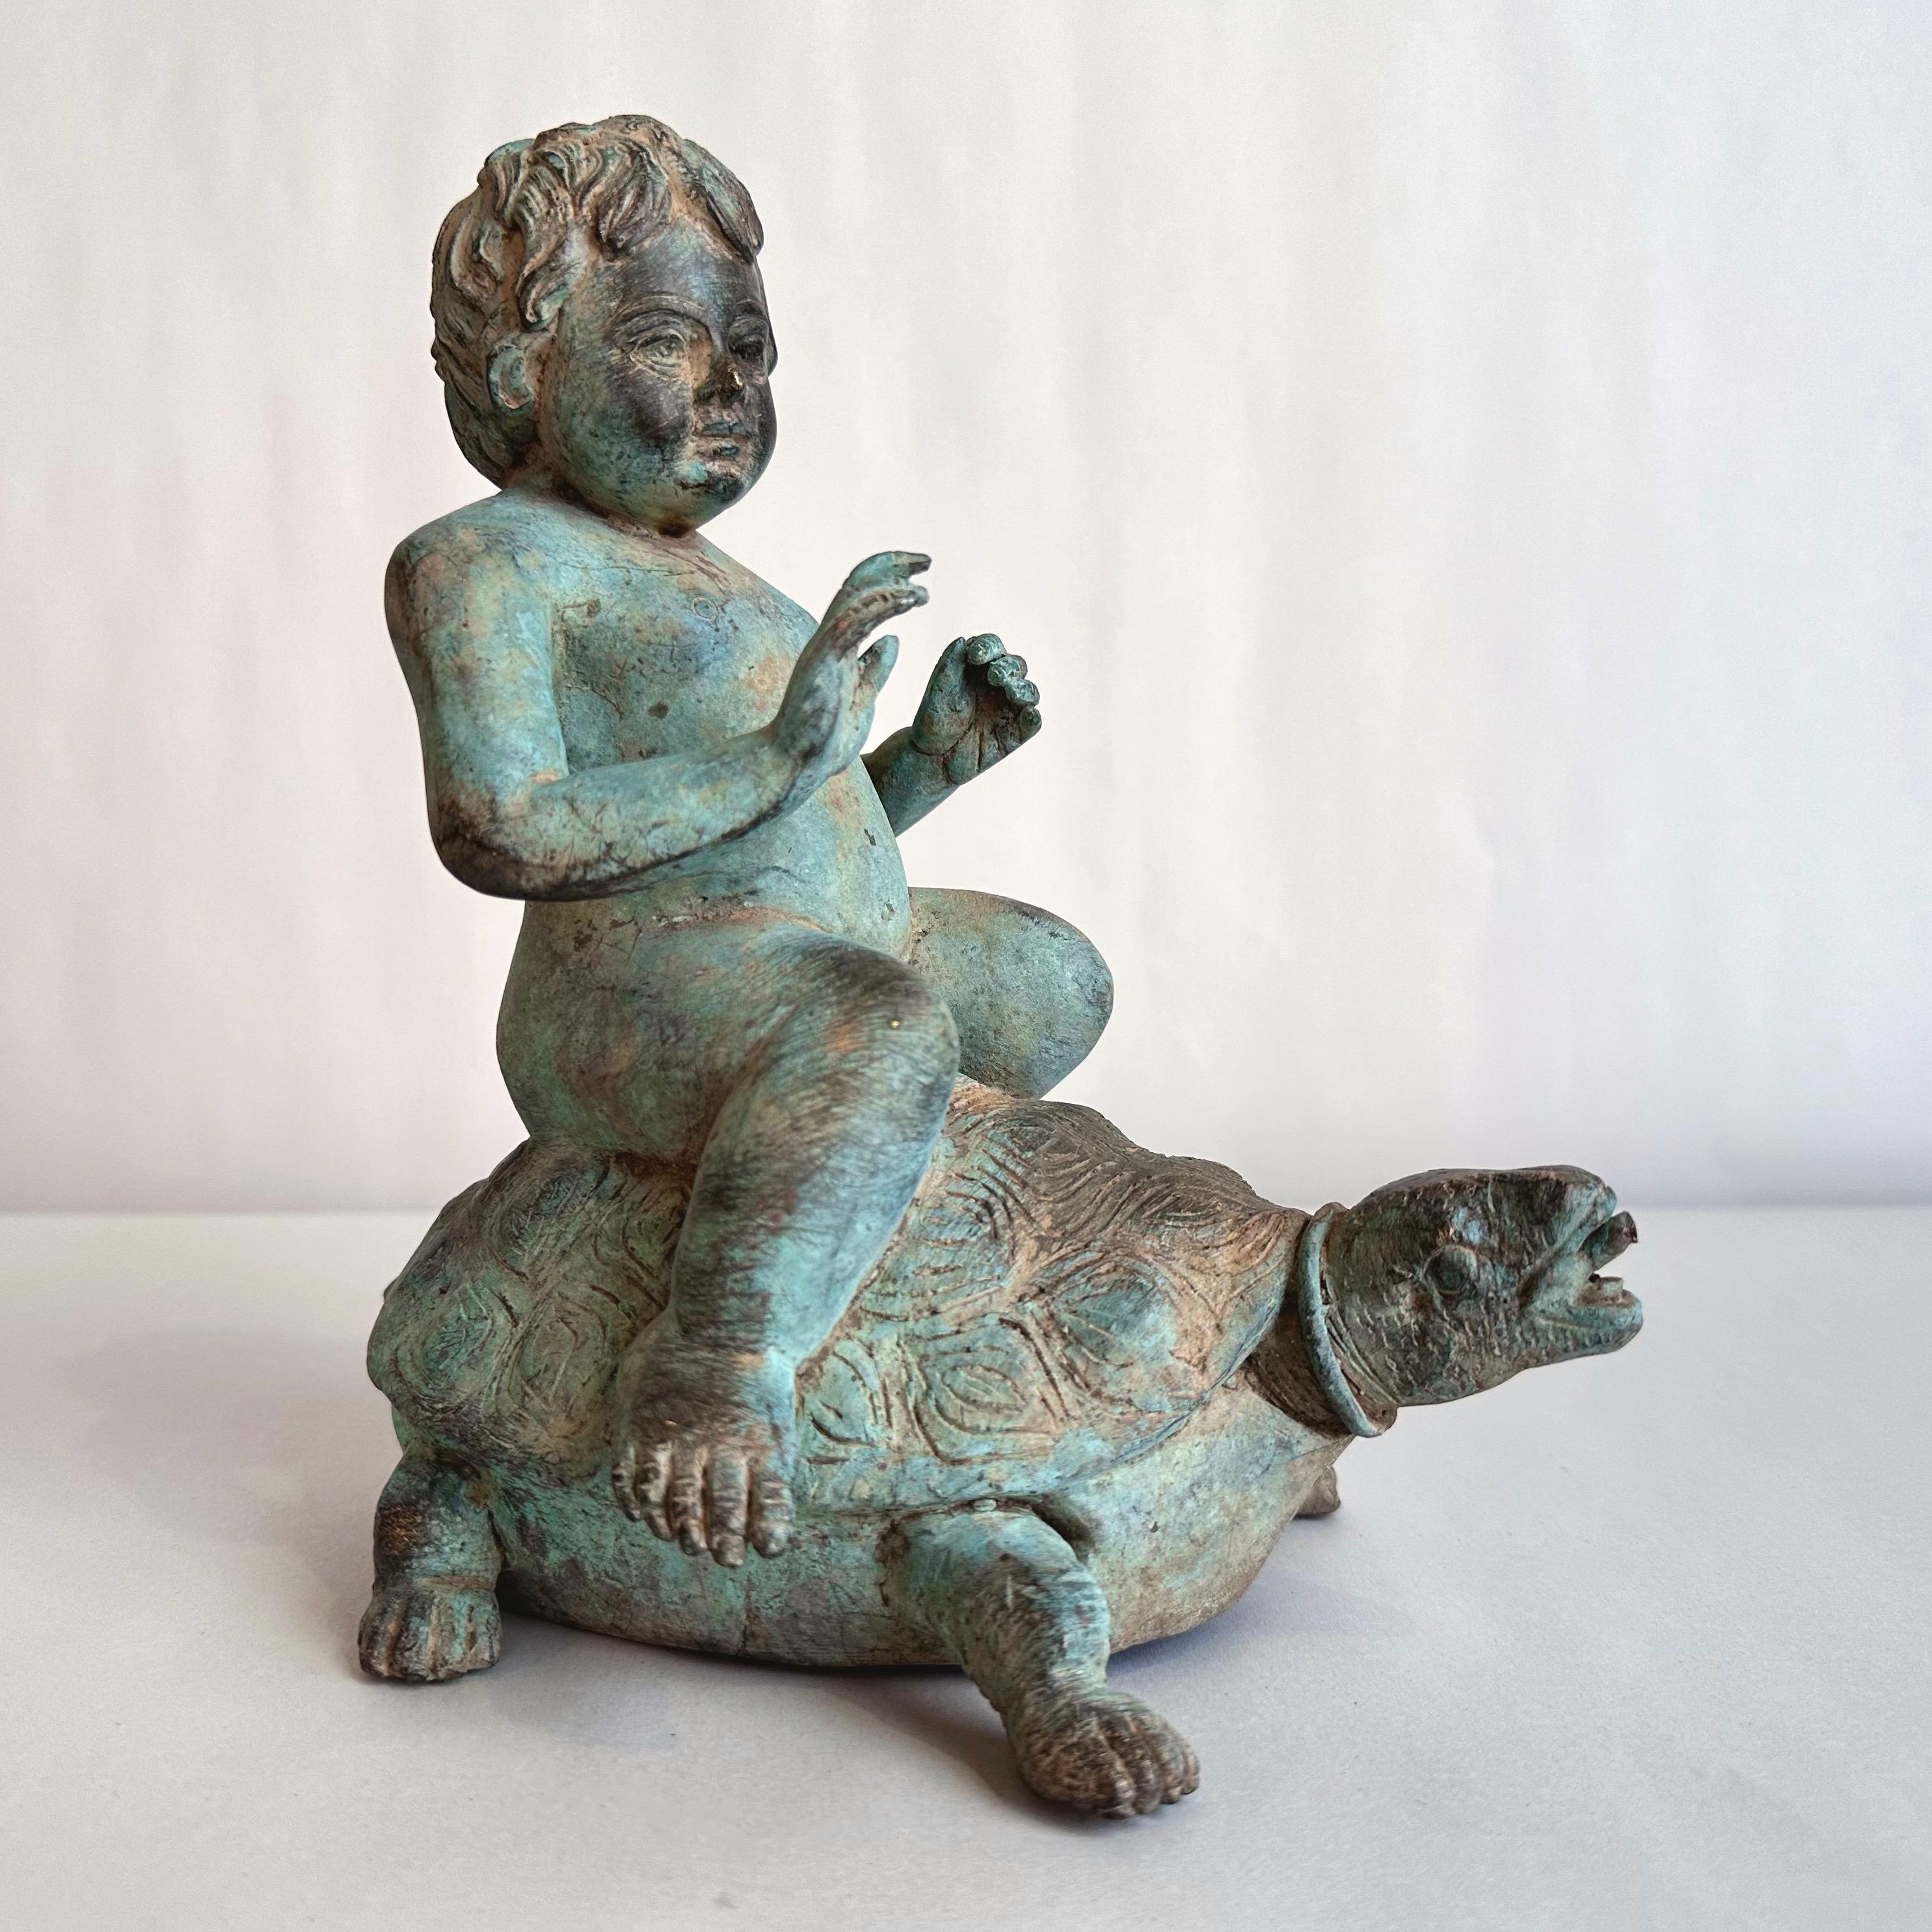 A delightful circa 1920 antique patinated cast bronze fountain head sculpture depicting a cherubic young boy riding a turtle, and more specifically, a Galápagos tortoise.

With a benevolent—yet somewhat inscrutable—expression on his face, our nicely